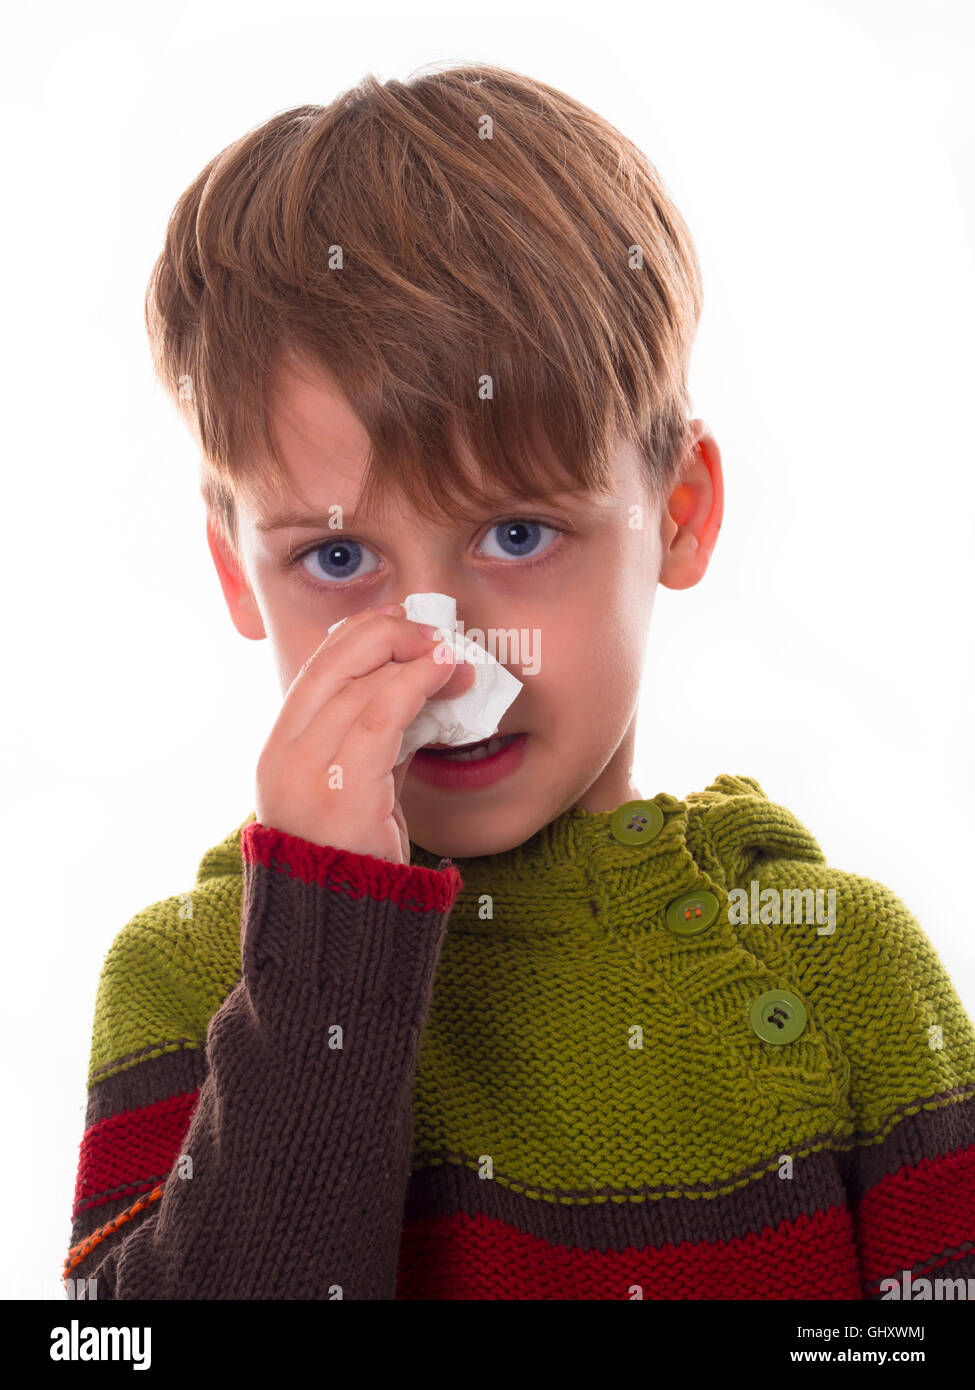 boy wiping his nose Stock Photo